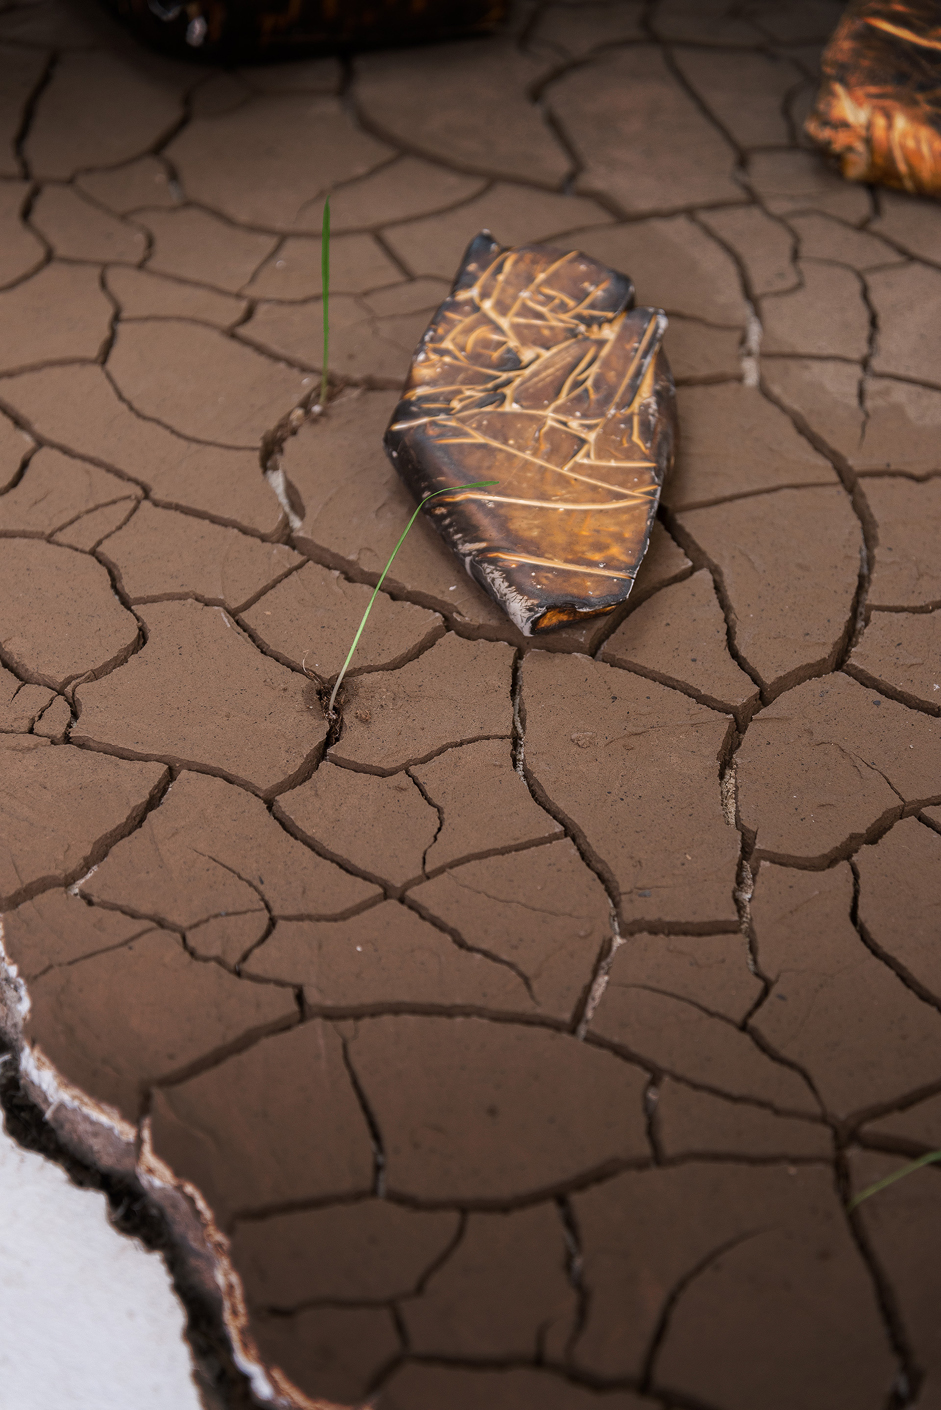  Installation detail of grass seeds sprouting from cracked earth. 